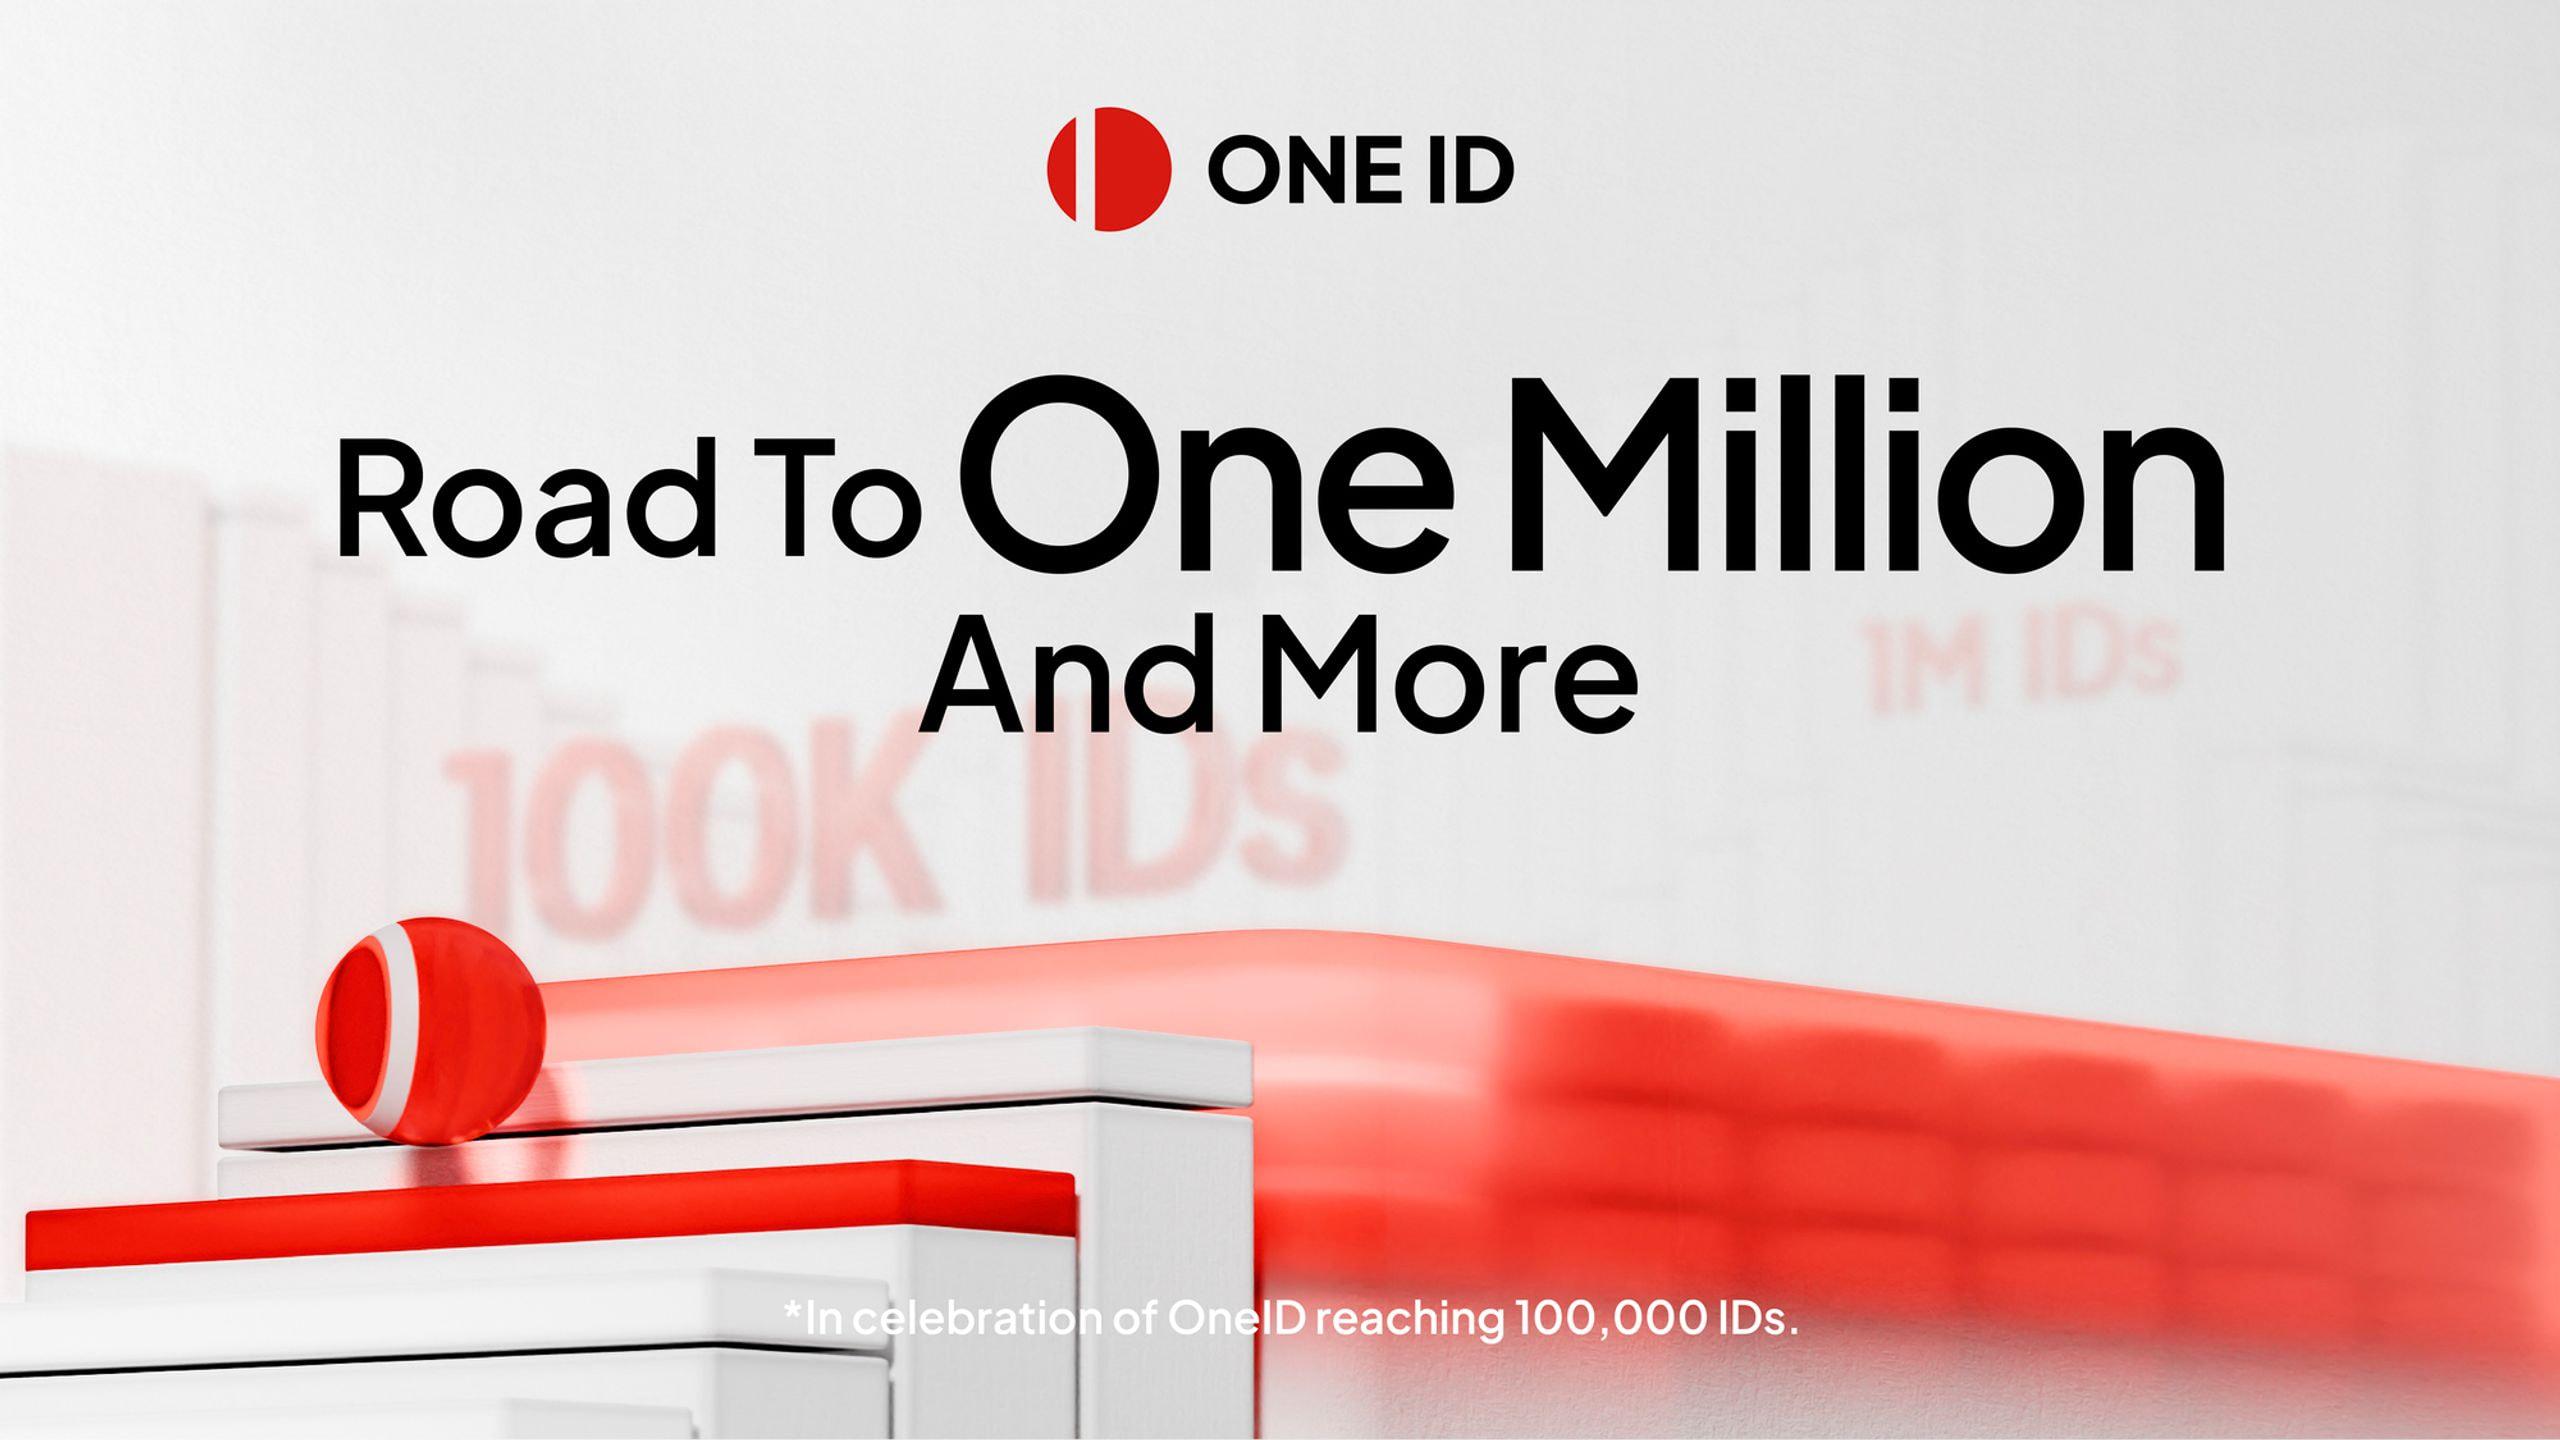 In Celebration Of Achieving 100K IDs: Join OneID On The Road To One Million And More!